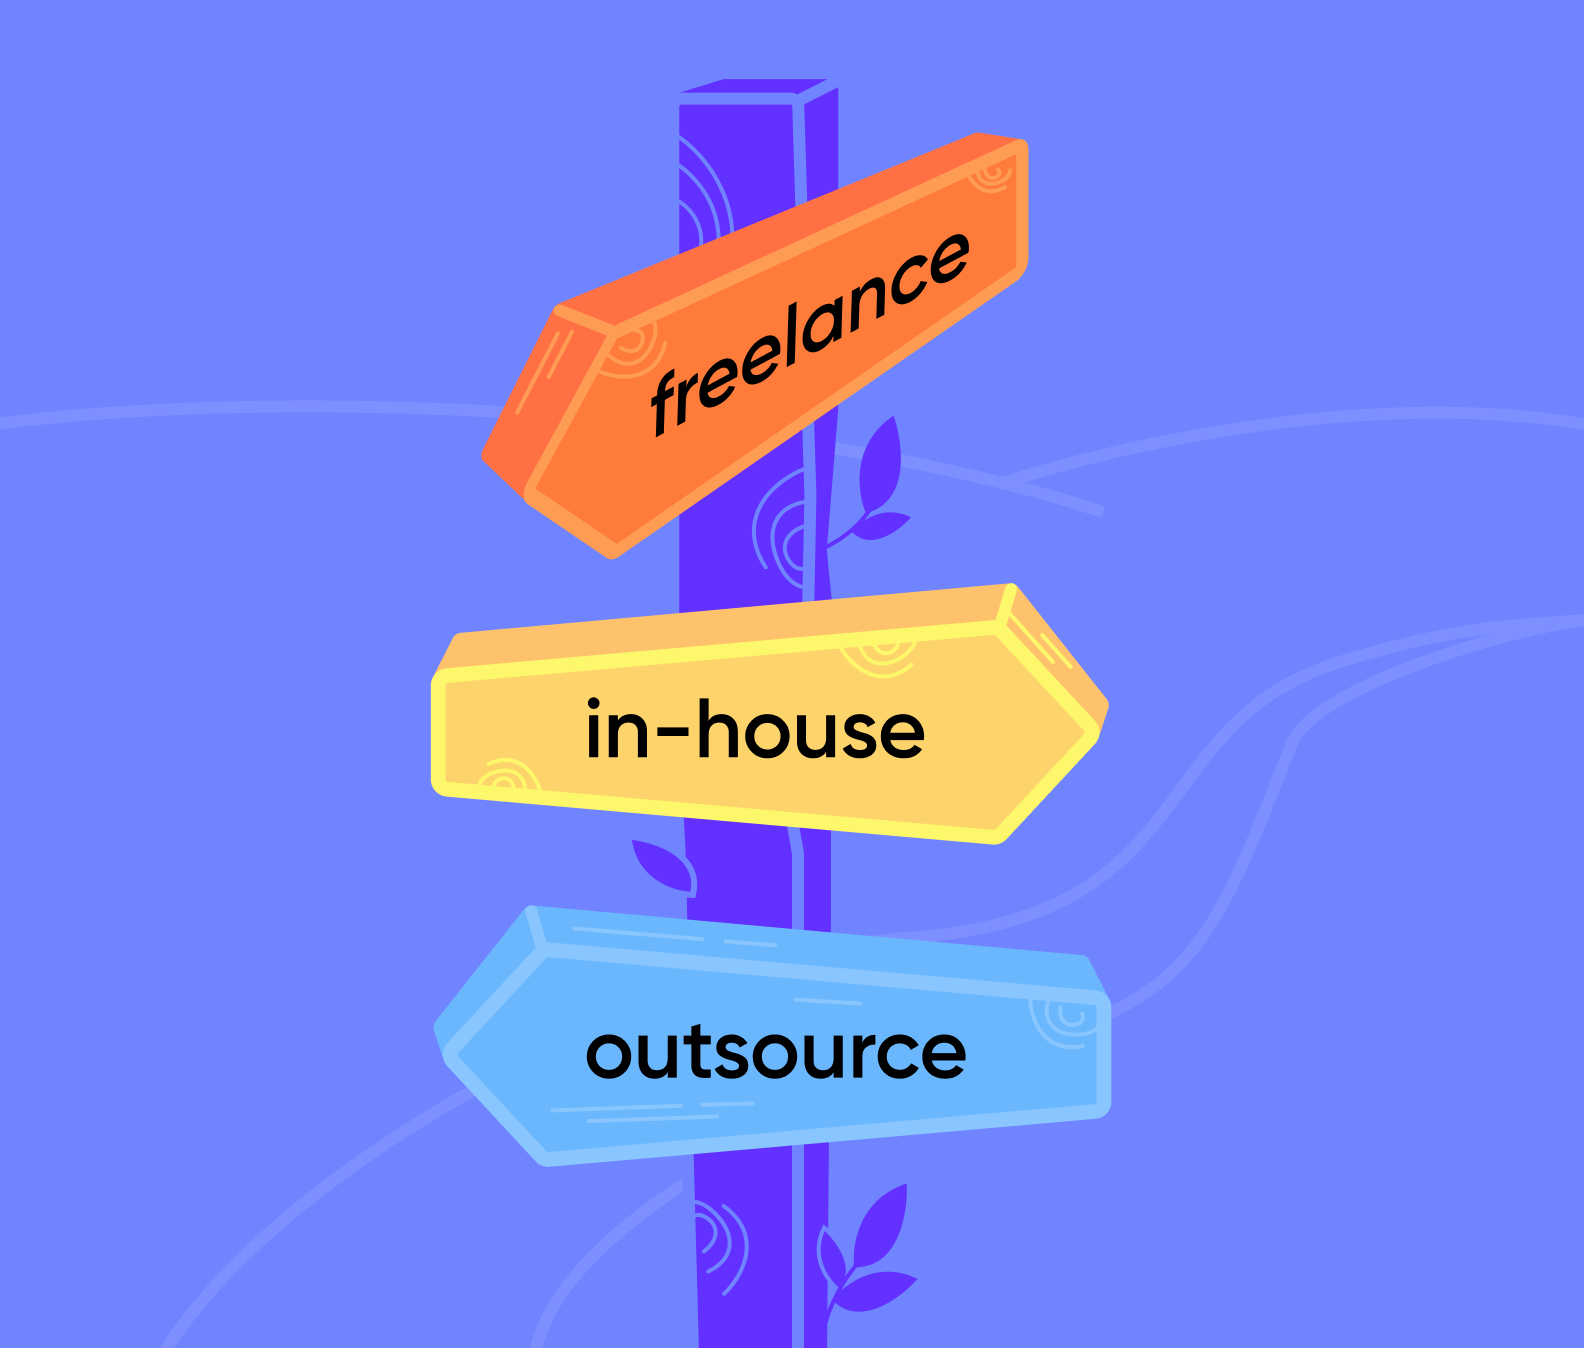 You have 3 options: freelance, in-house, and outsource